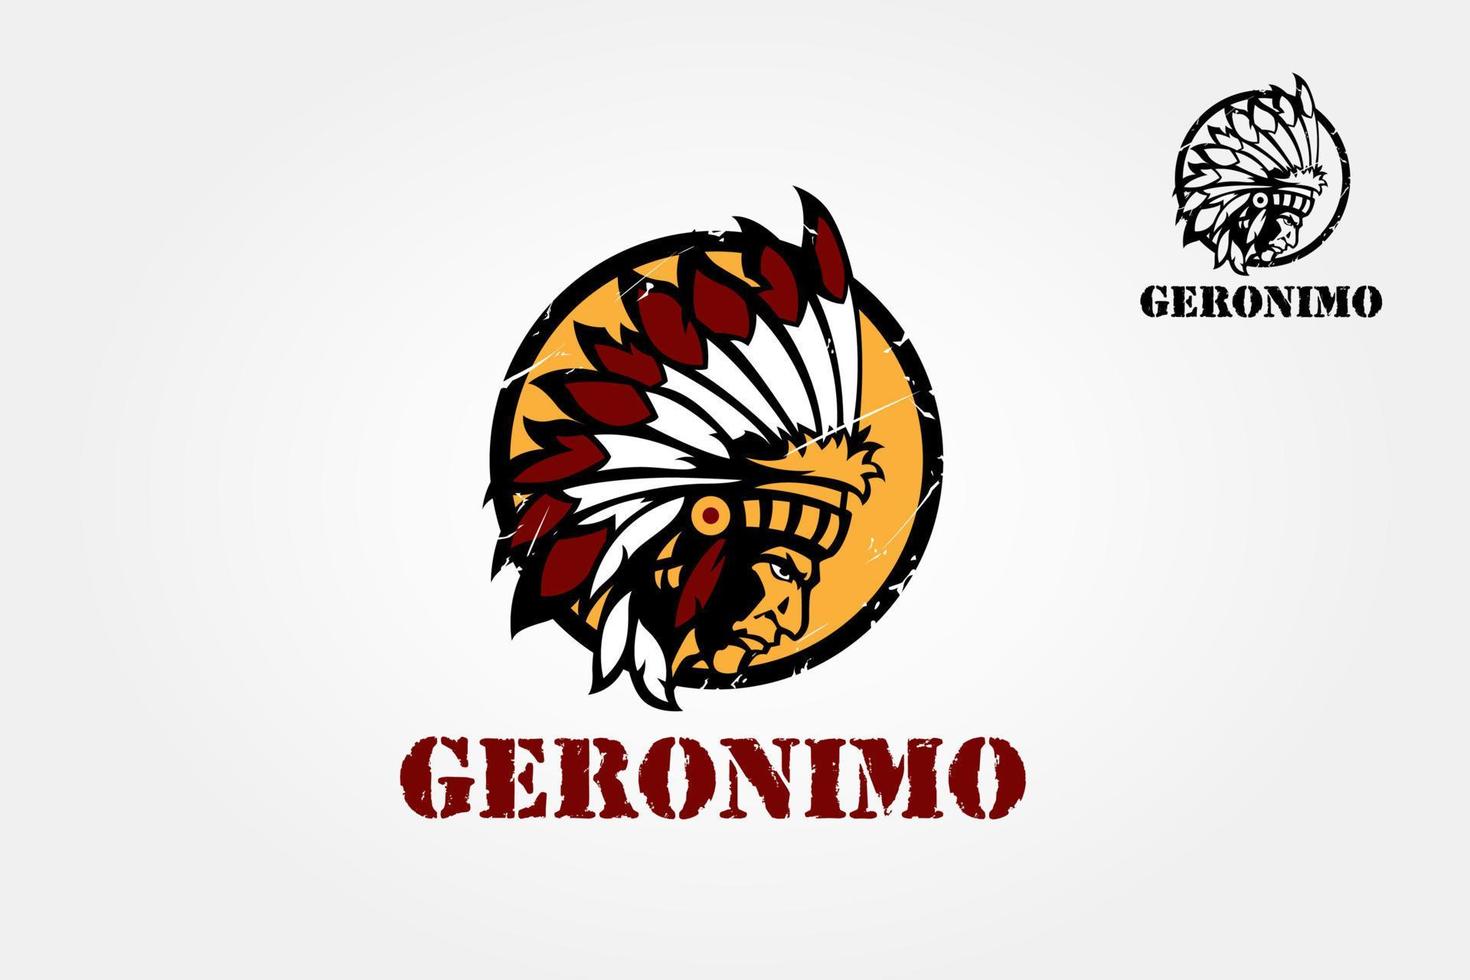 Geronimo Vector Logo Illustration. Logo illustration of a native american indian chief done in circle retro style on isolated white background.